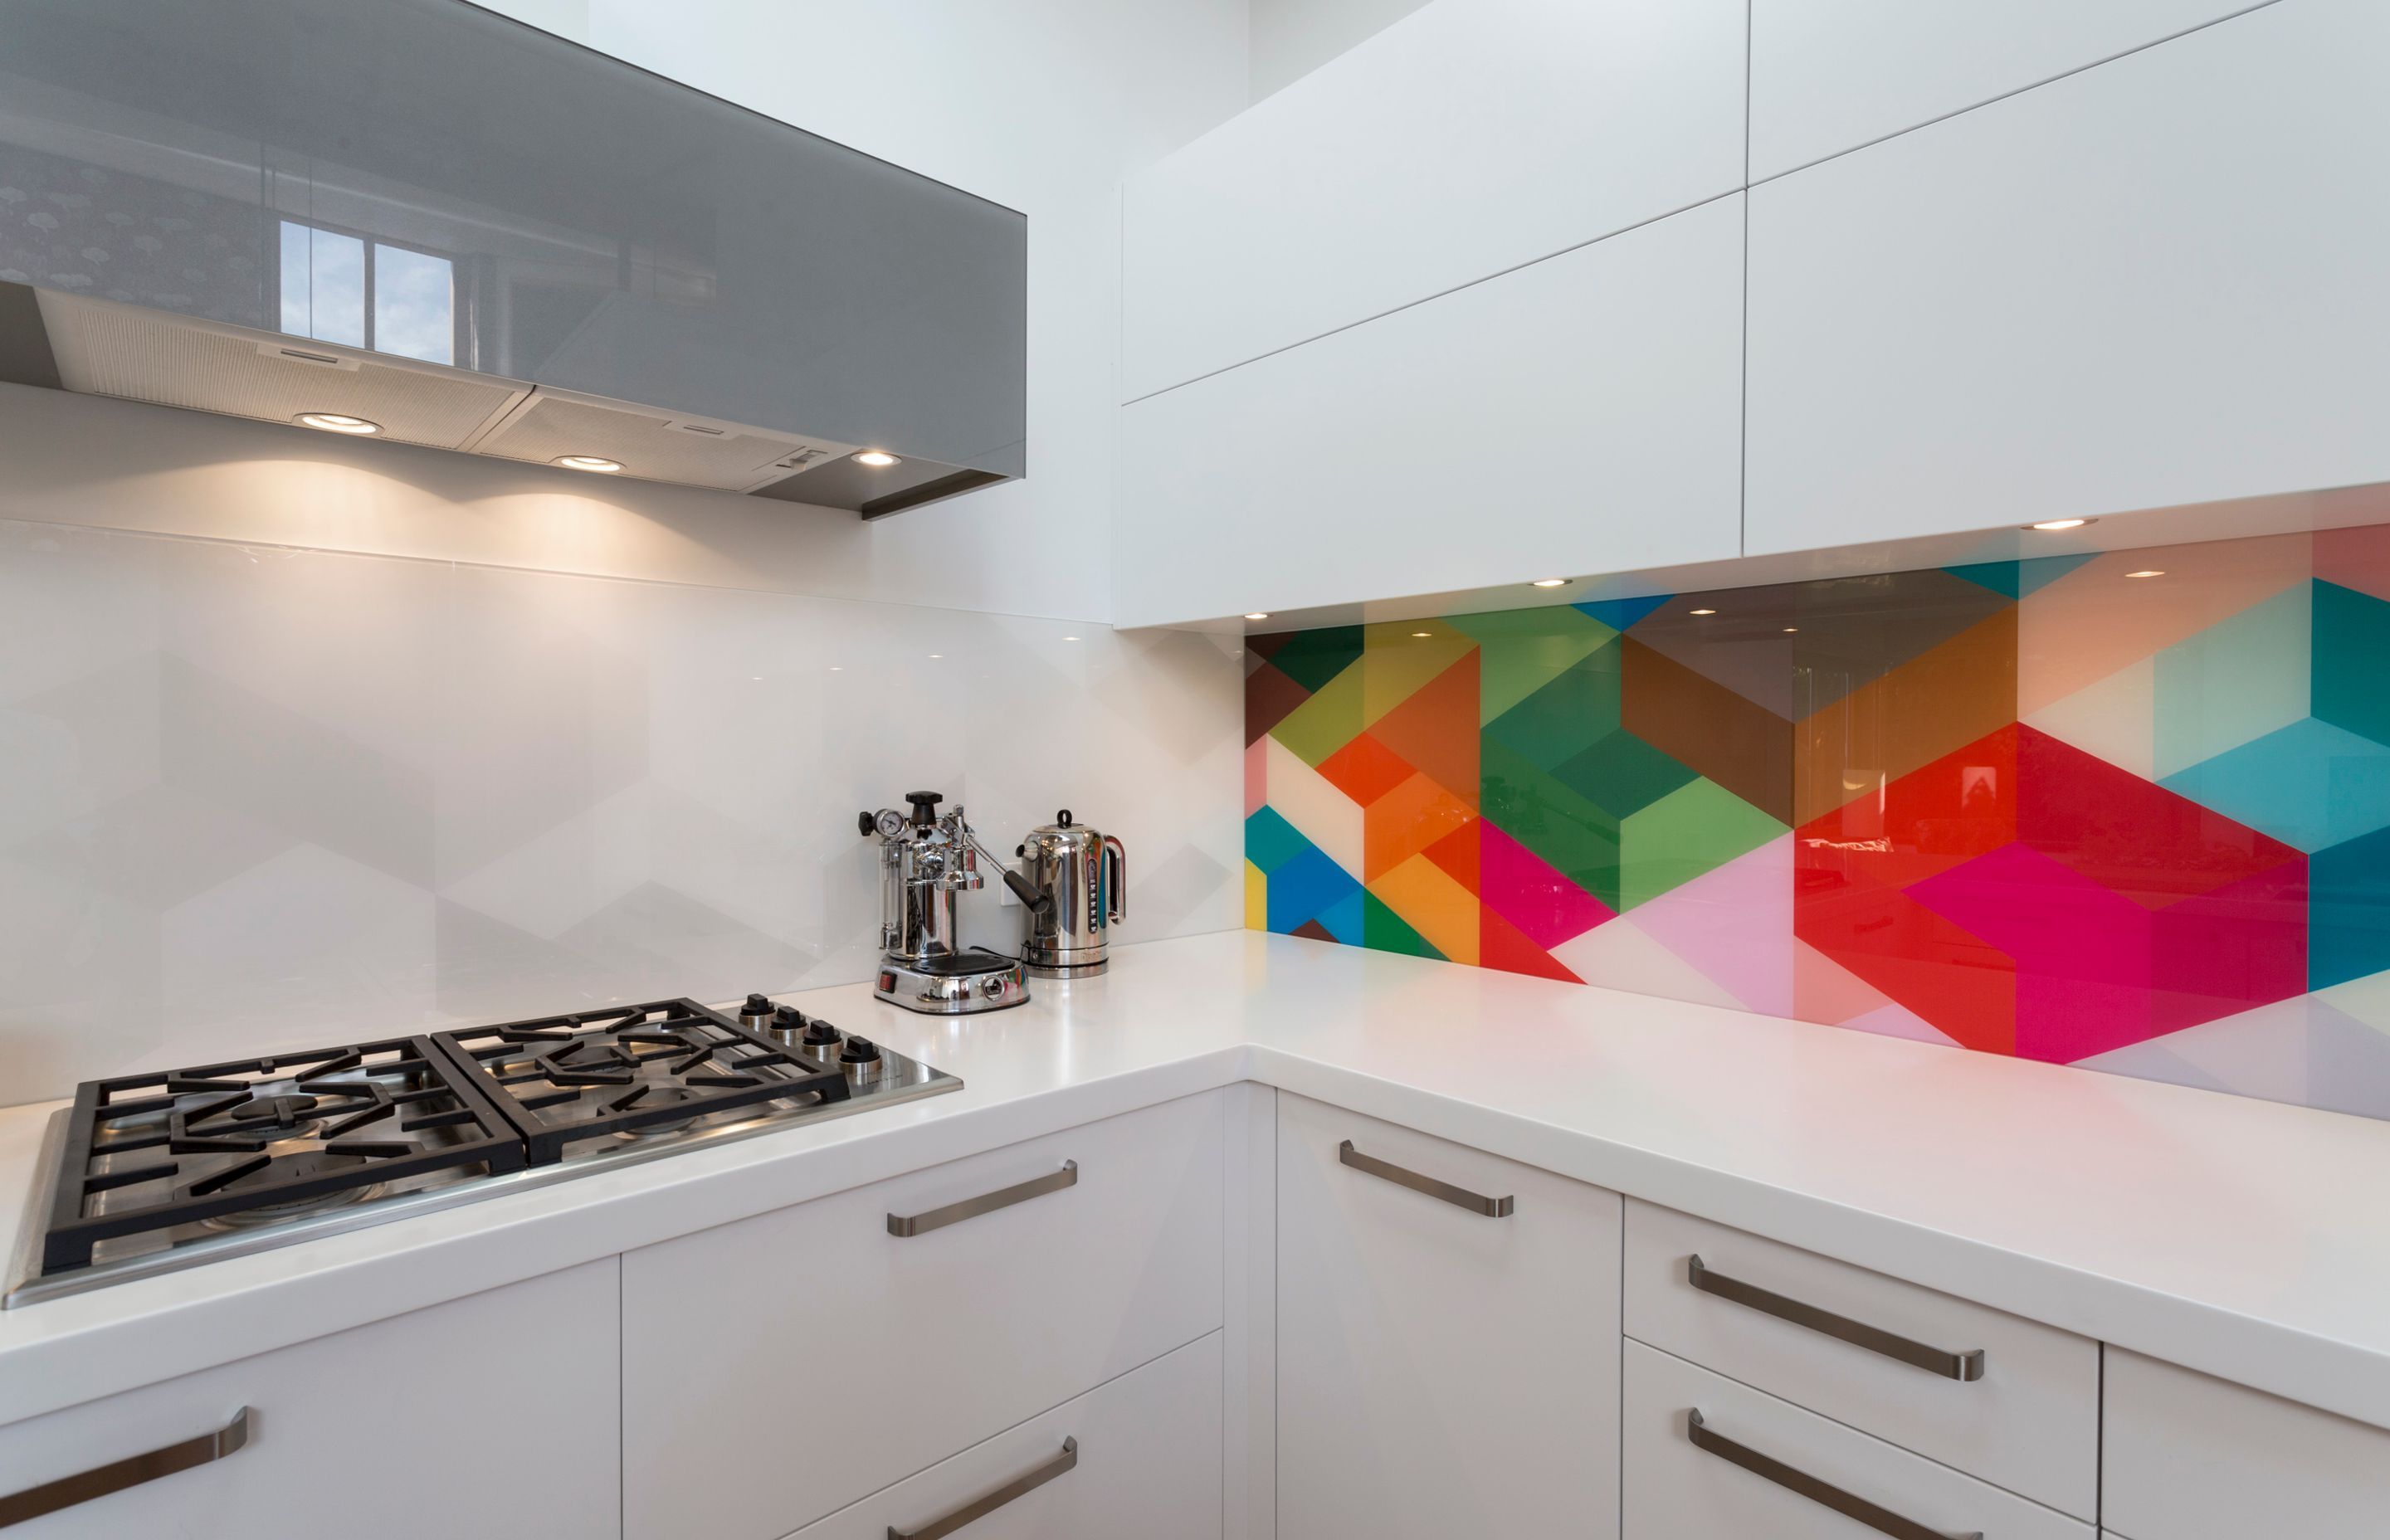 This kitchen designed by Toni Roberts from Kitchen Architecture demonstrates how you can create a piece of art that has high impact. Note the bright geometric pattern is replicated in grey tones on the adjacent wall and the overall effect is still as stunning today as it was in 2015 when it was installed.